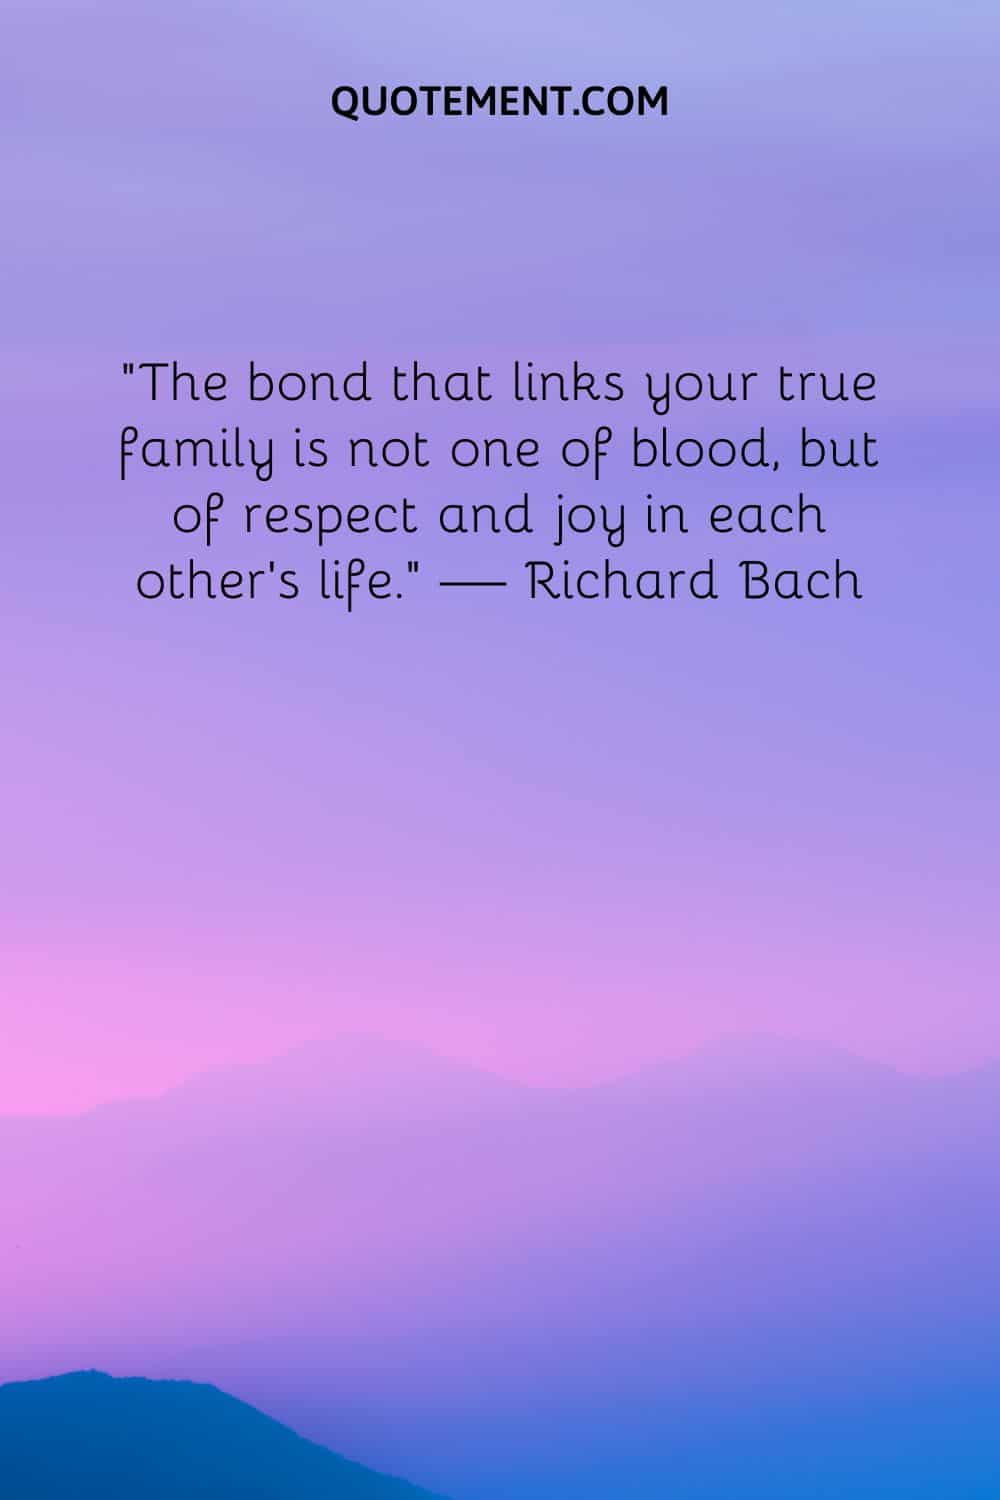 The bond that links your true family is not one of blood, but of respect and joy in each other’s life